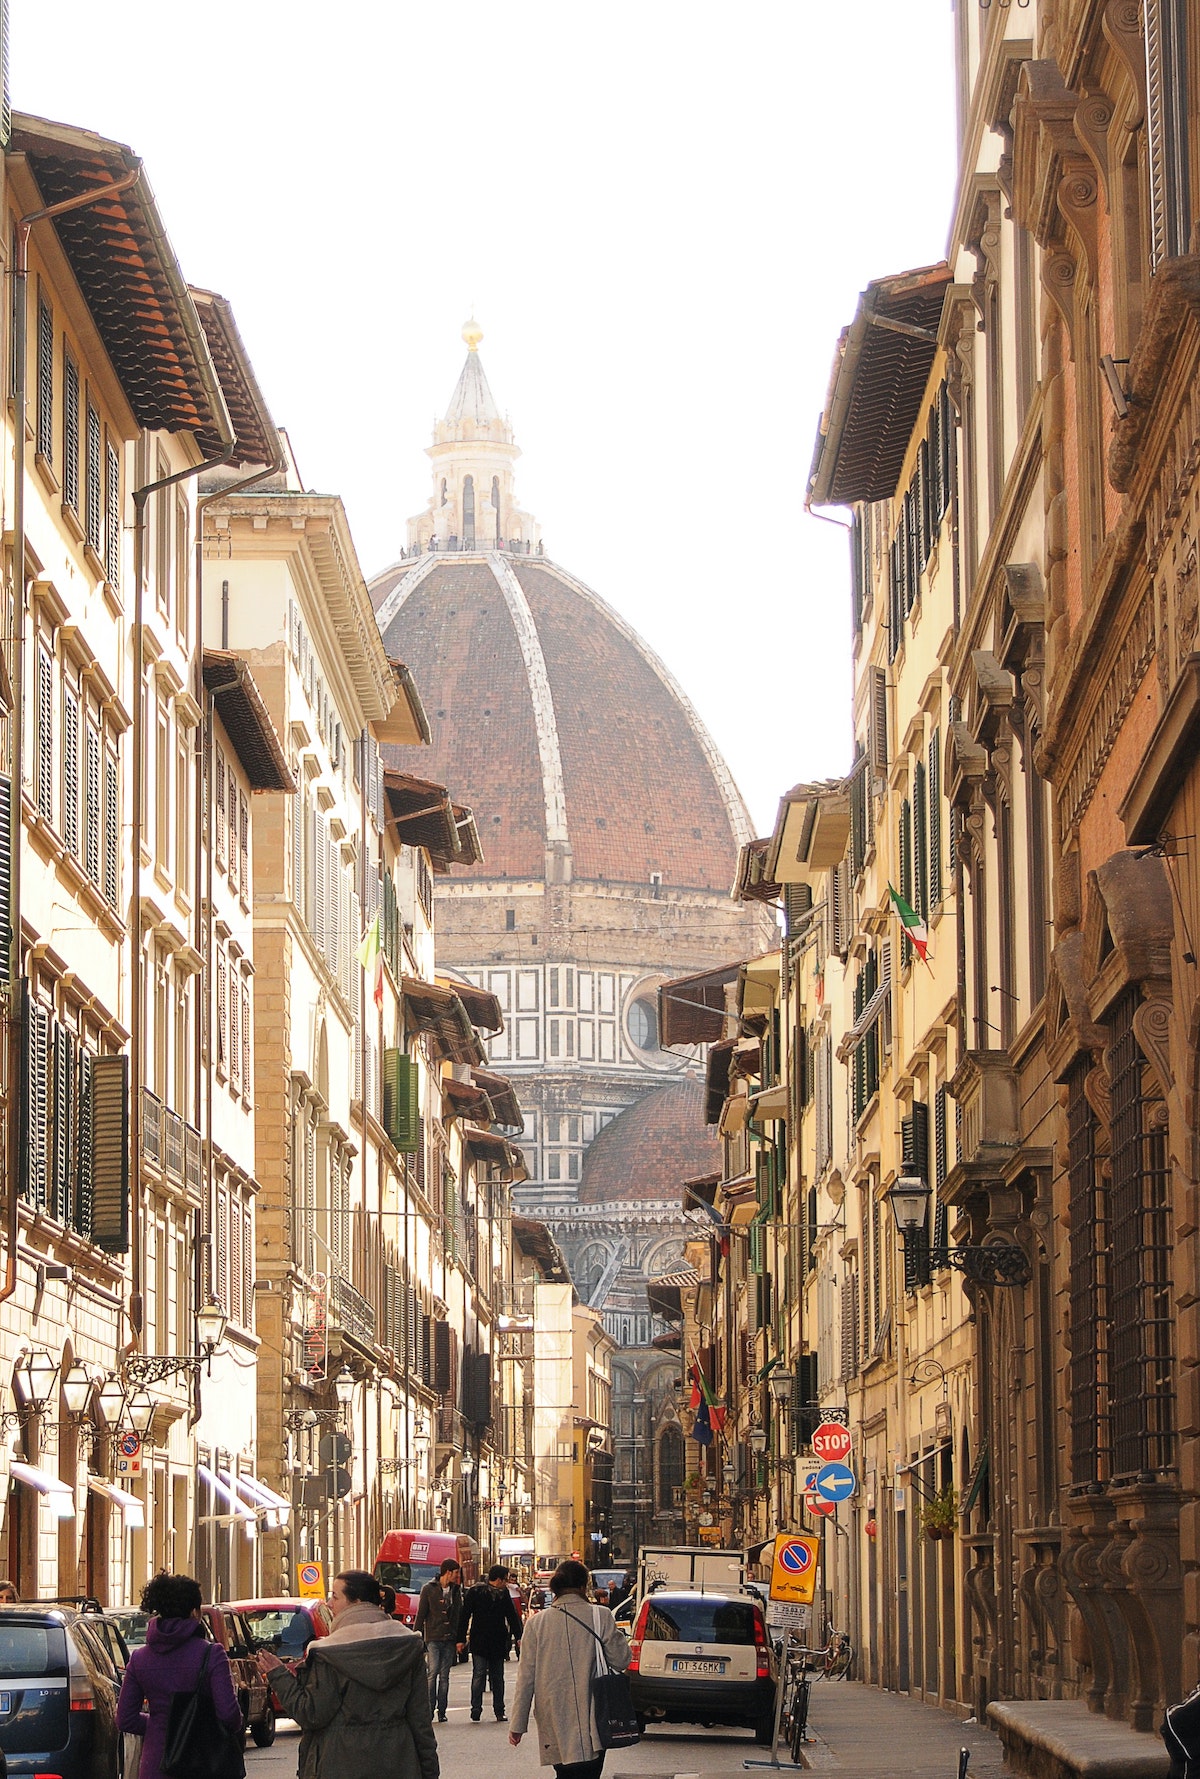 City streets of Florence, Italy with the cathedral dome visible in the background